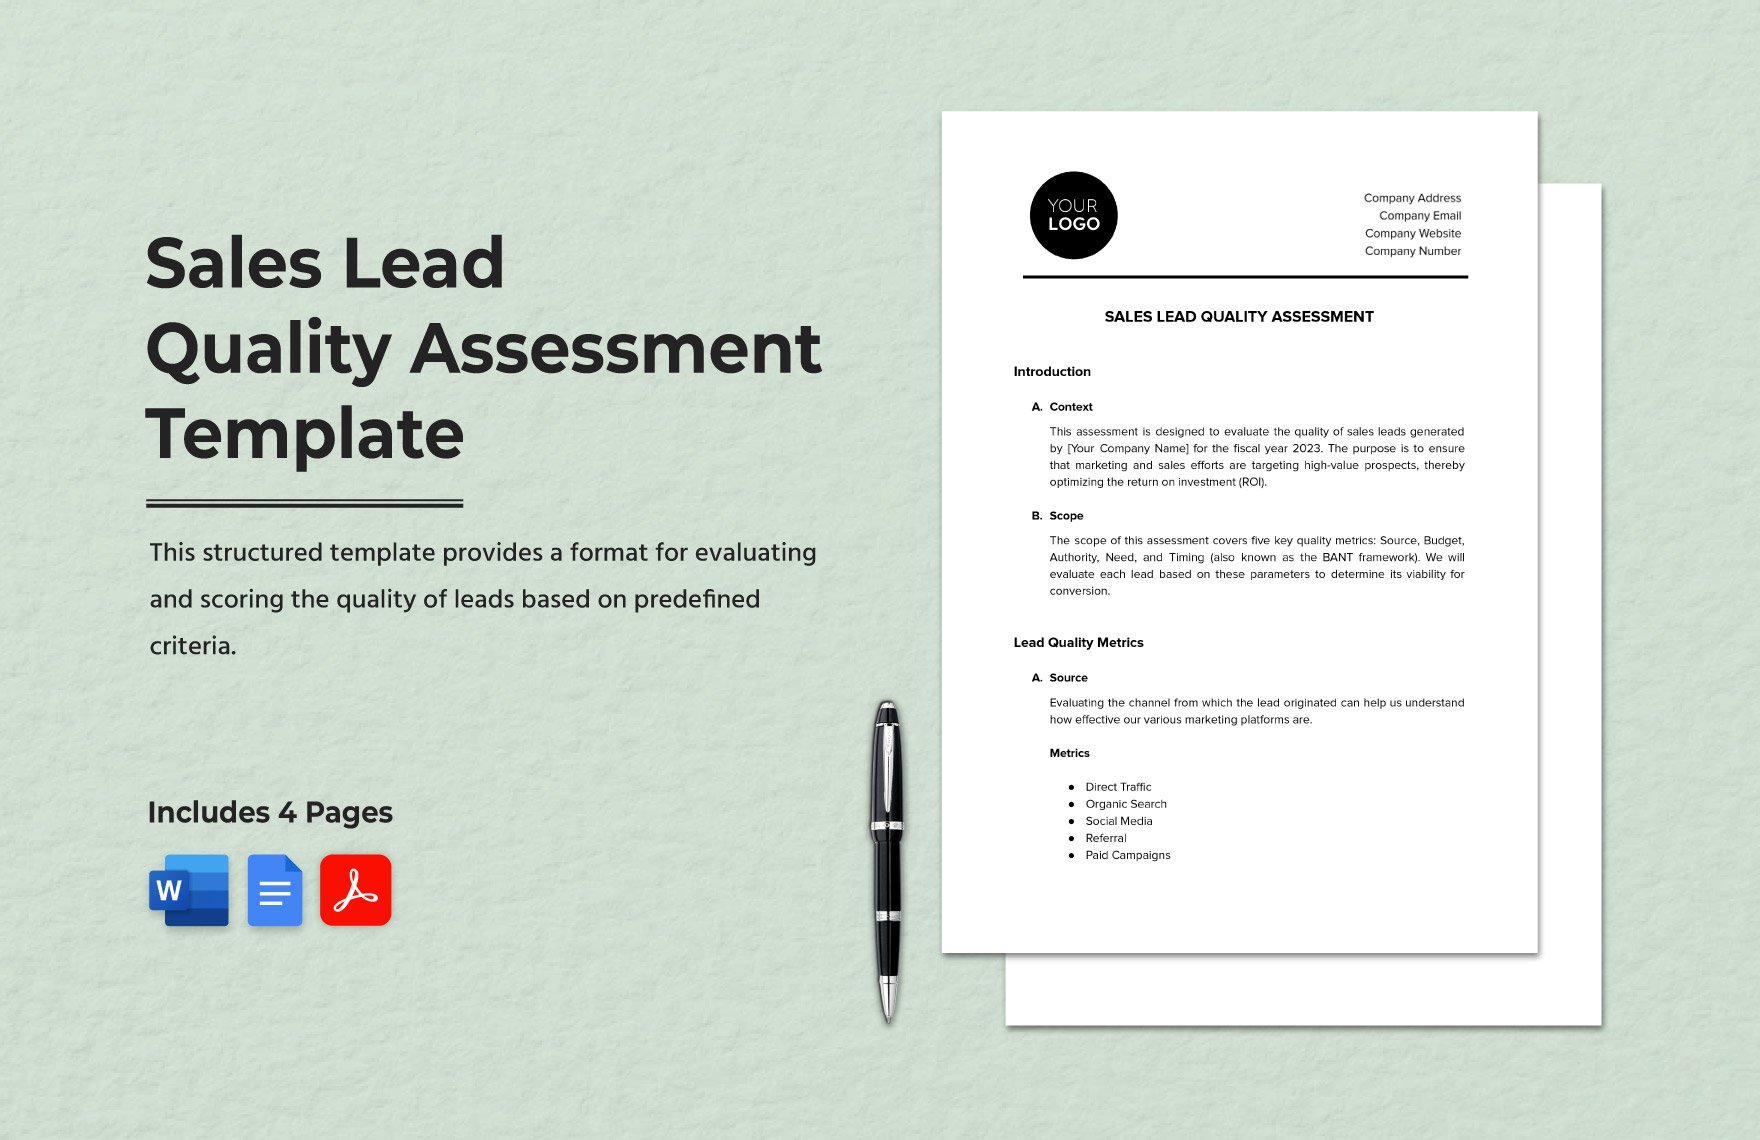 Sales Lead Quality Assessment Template in Word, Google Docs, PDF